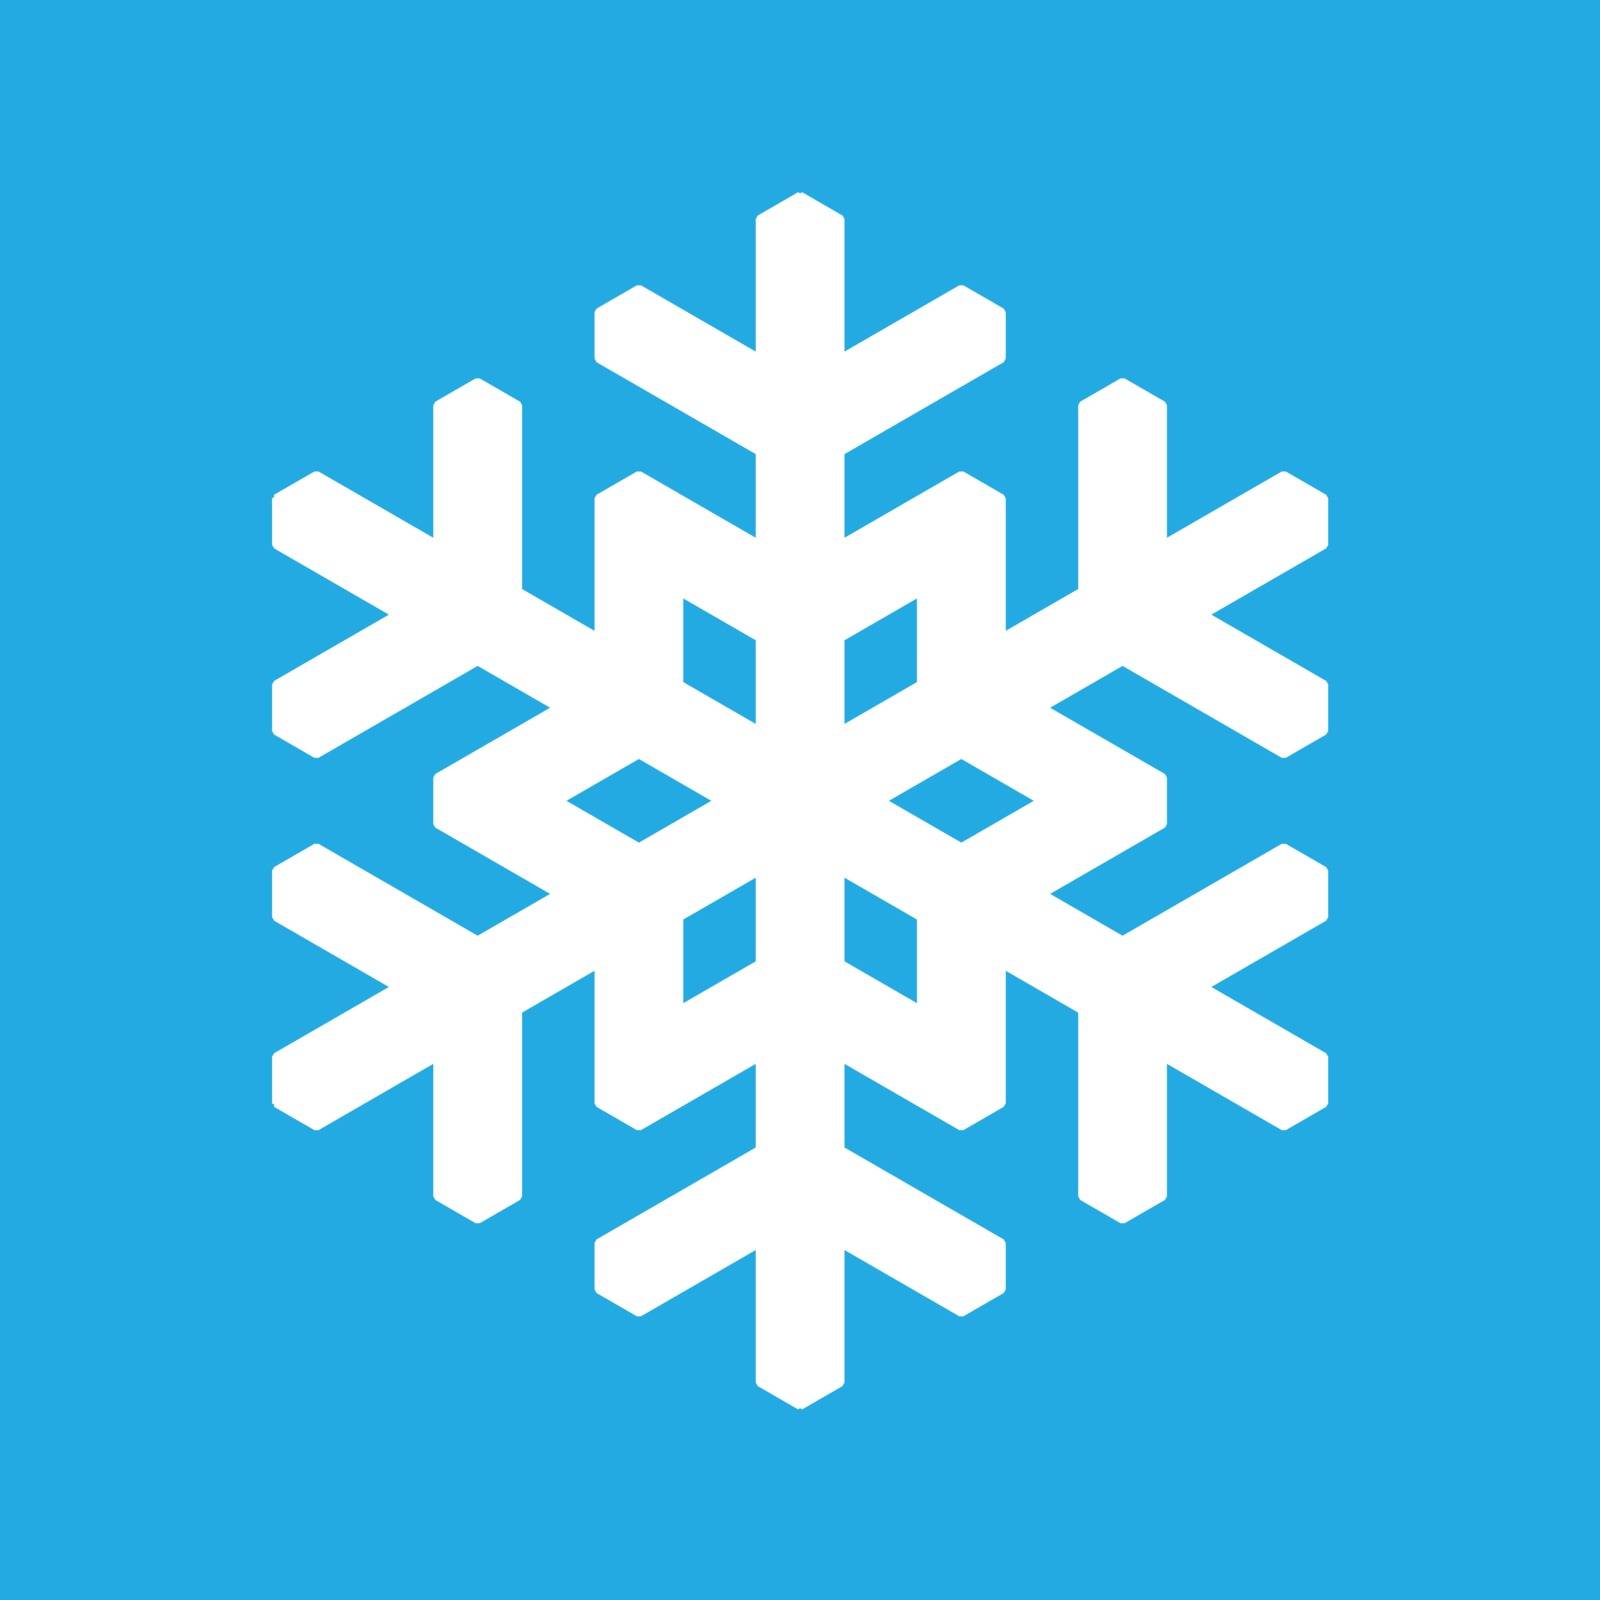 Snowflake icon. Christmas and winter theme. Simple flat white illustration on blue background by pyty